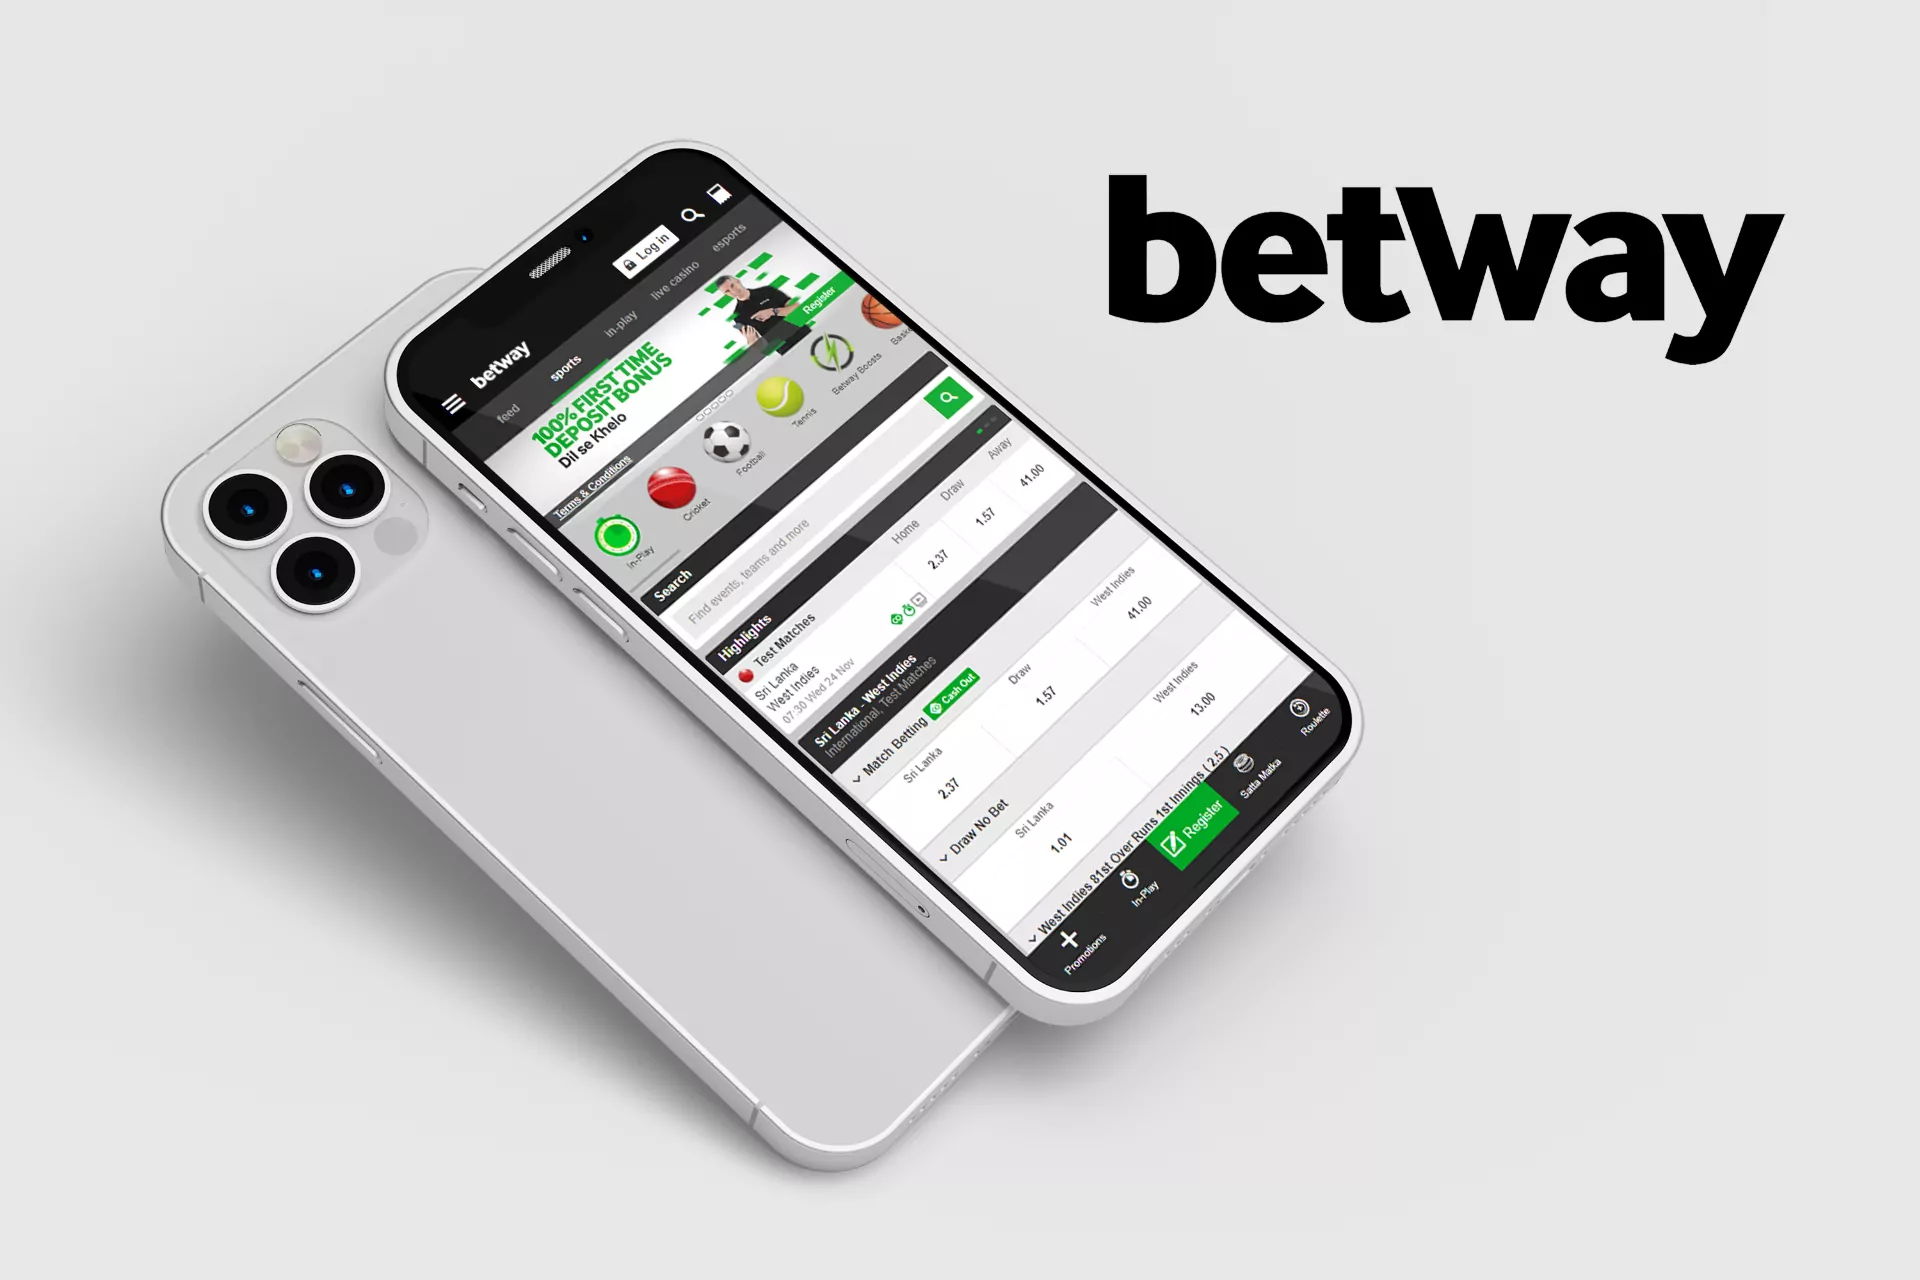 Betway is a worldwide and trustworthy bookmaker that has its own app for Android and iOS platforms.